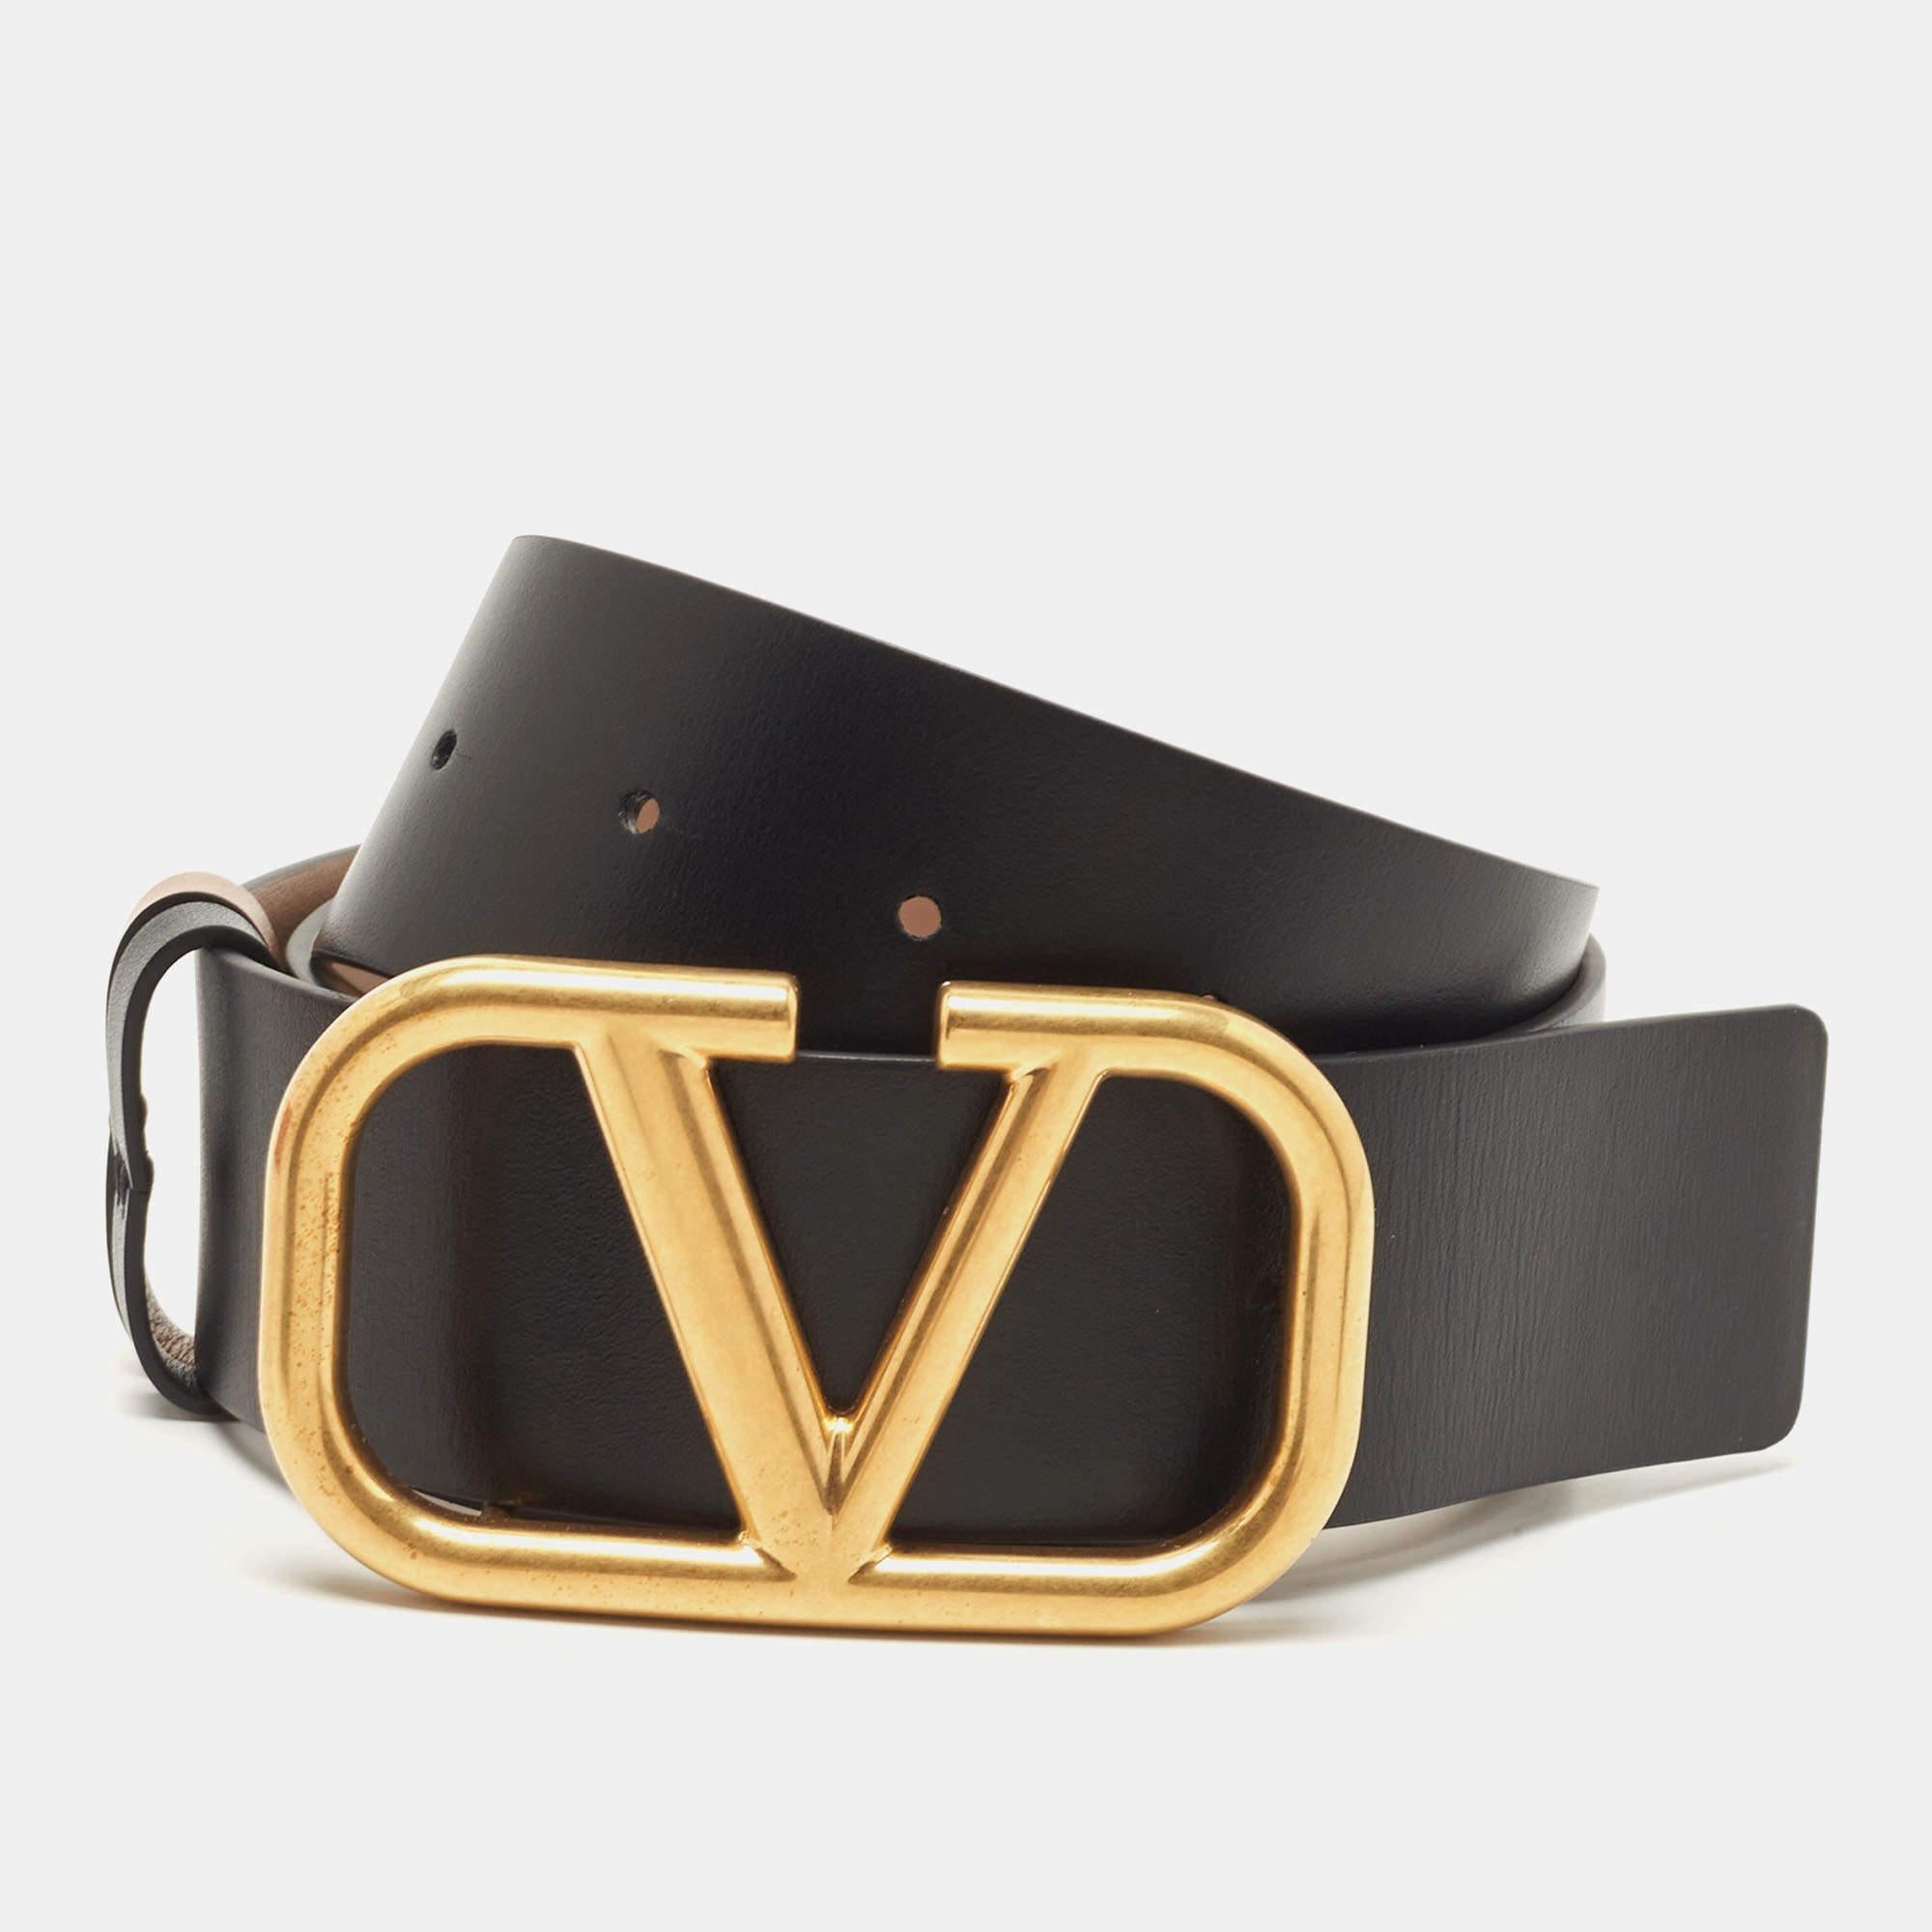 The Valentino belt is a luxurious and versatile accessory. Crafted from high-quality leather, it features a beige side with the iconic VLogo buckle in black, while the reverse side showcases a sleek all-black design. Perfect for adding a touch of